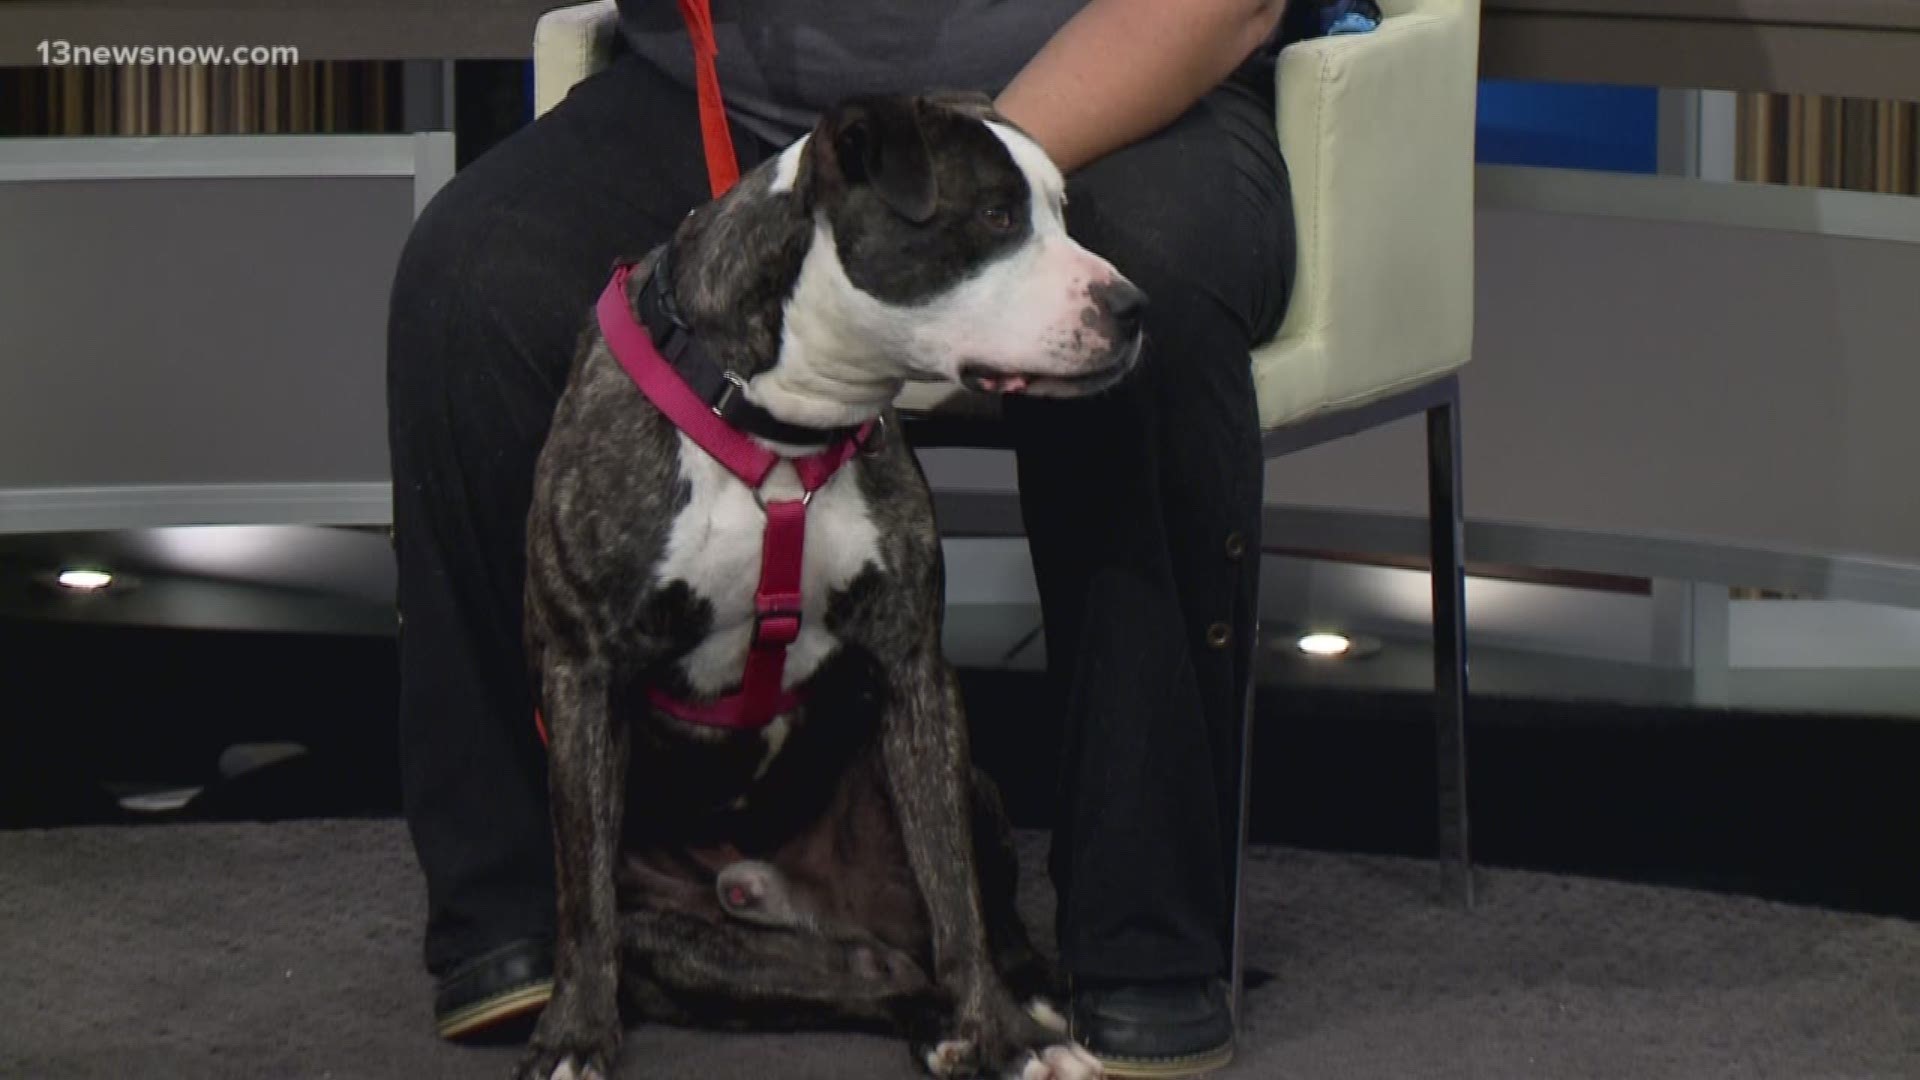 The Portsmouth Humane Society brought in King for 13News Now's Shelter Sunday.